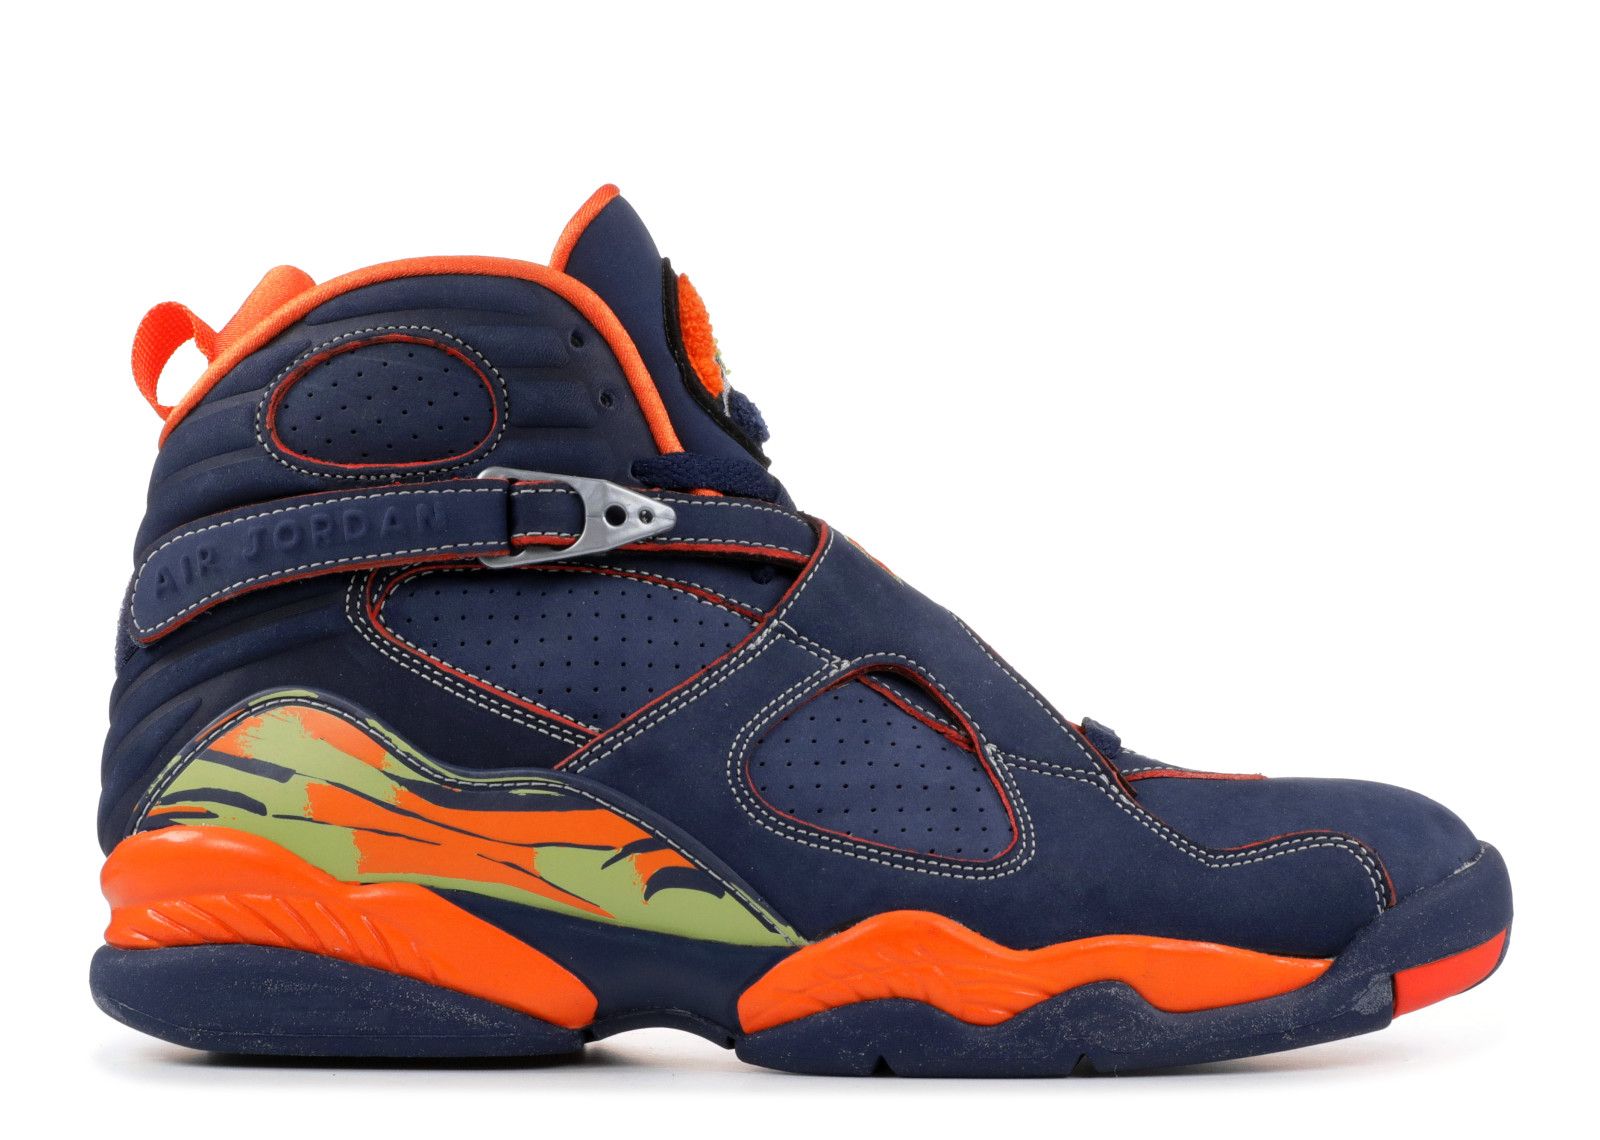 The 20 Ugliest Sneakers of the Past 20 Years